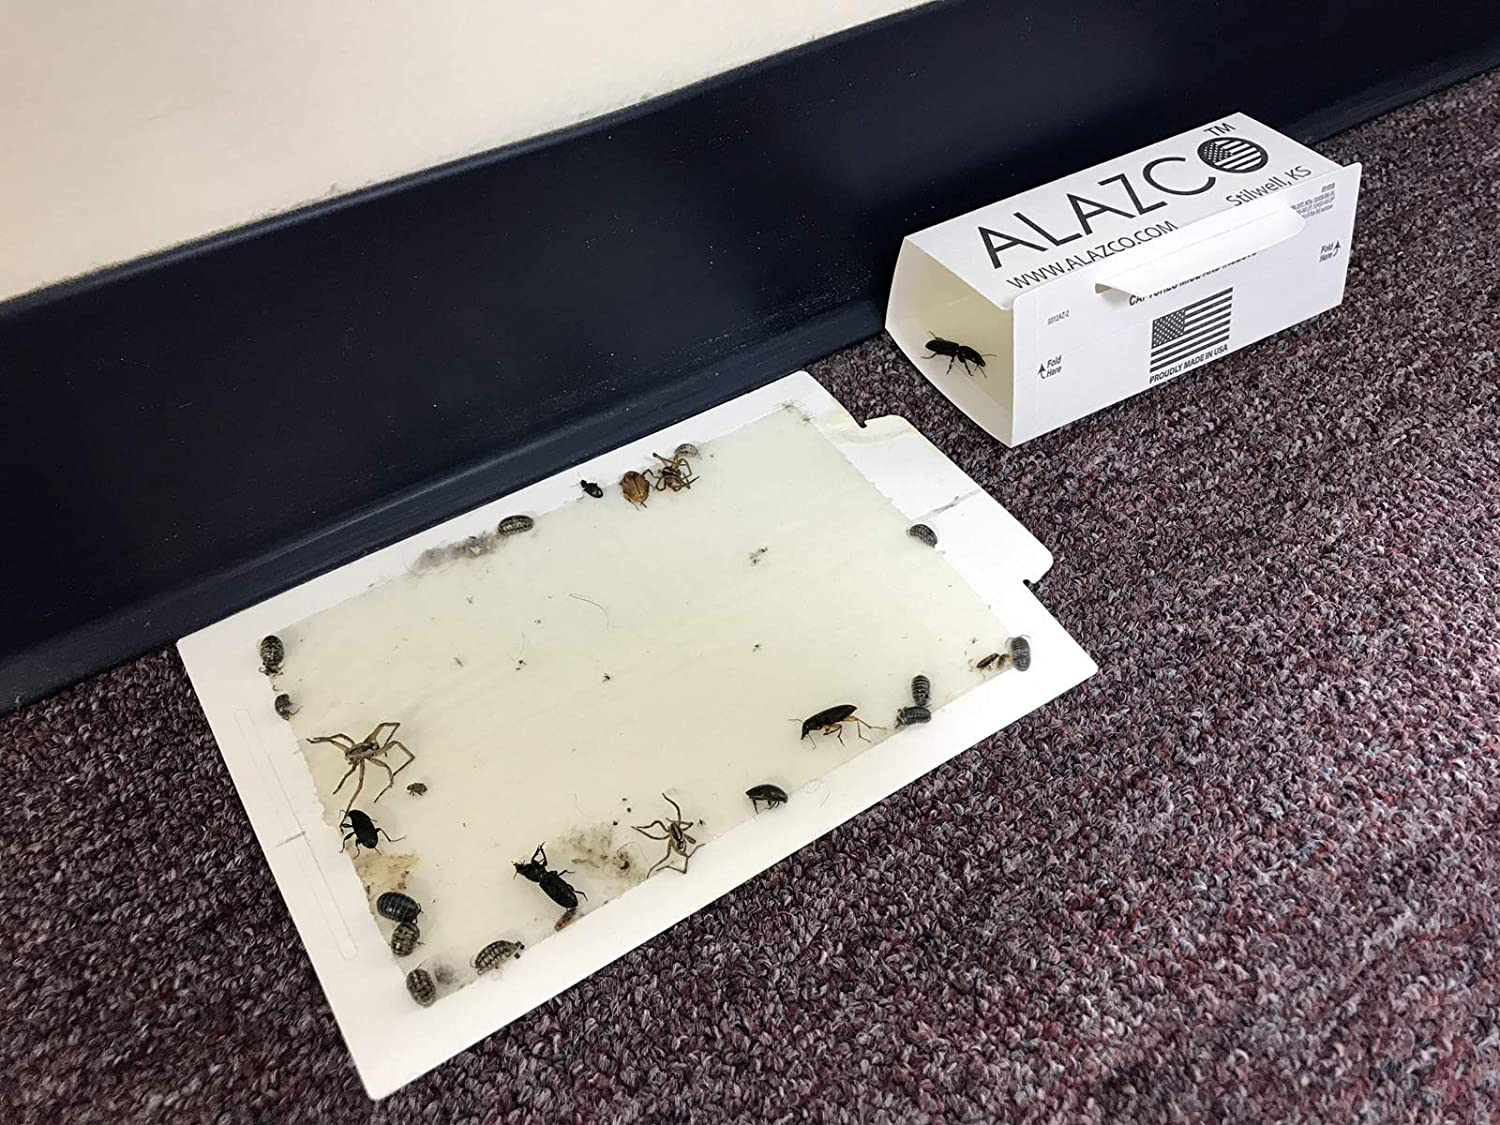 ALAZCO 6 Glue Traps - Excellent Quality Glue Boards Mouse Trap Bugs Insects Spiders, Brown Recluse, Crickets Cockroaches Lizard Scorpion Mice Trap & Monitor Non-Toxic Made in USA